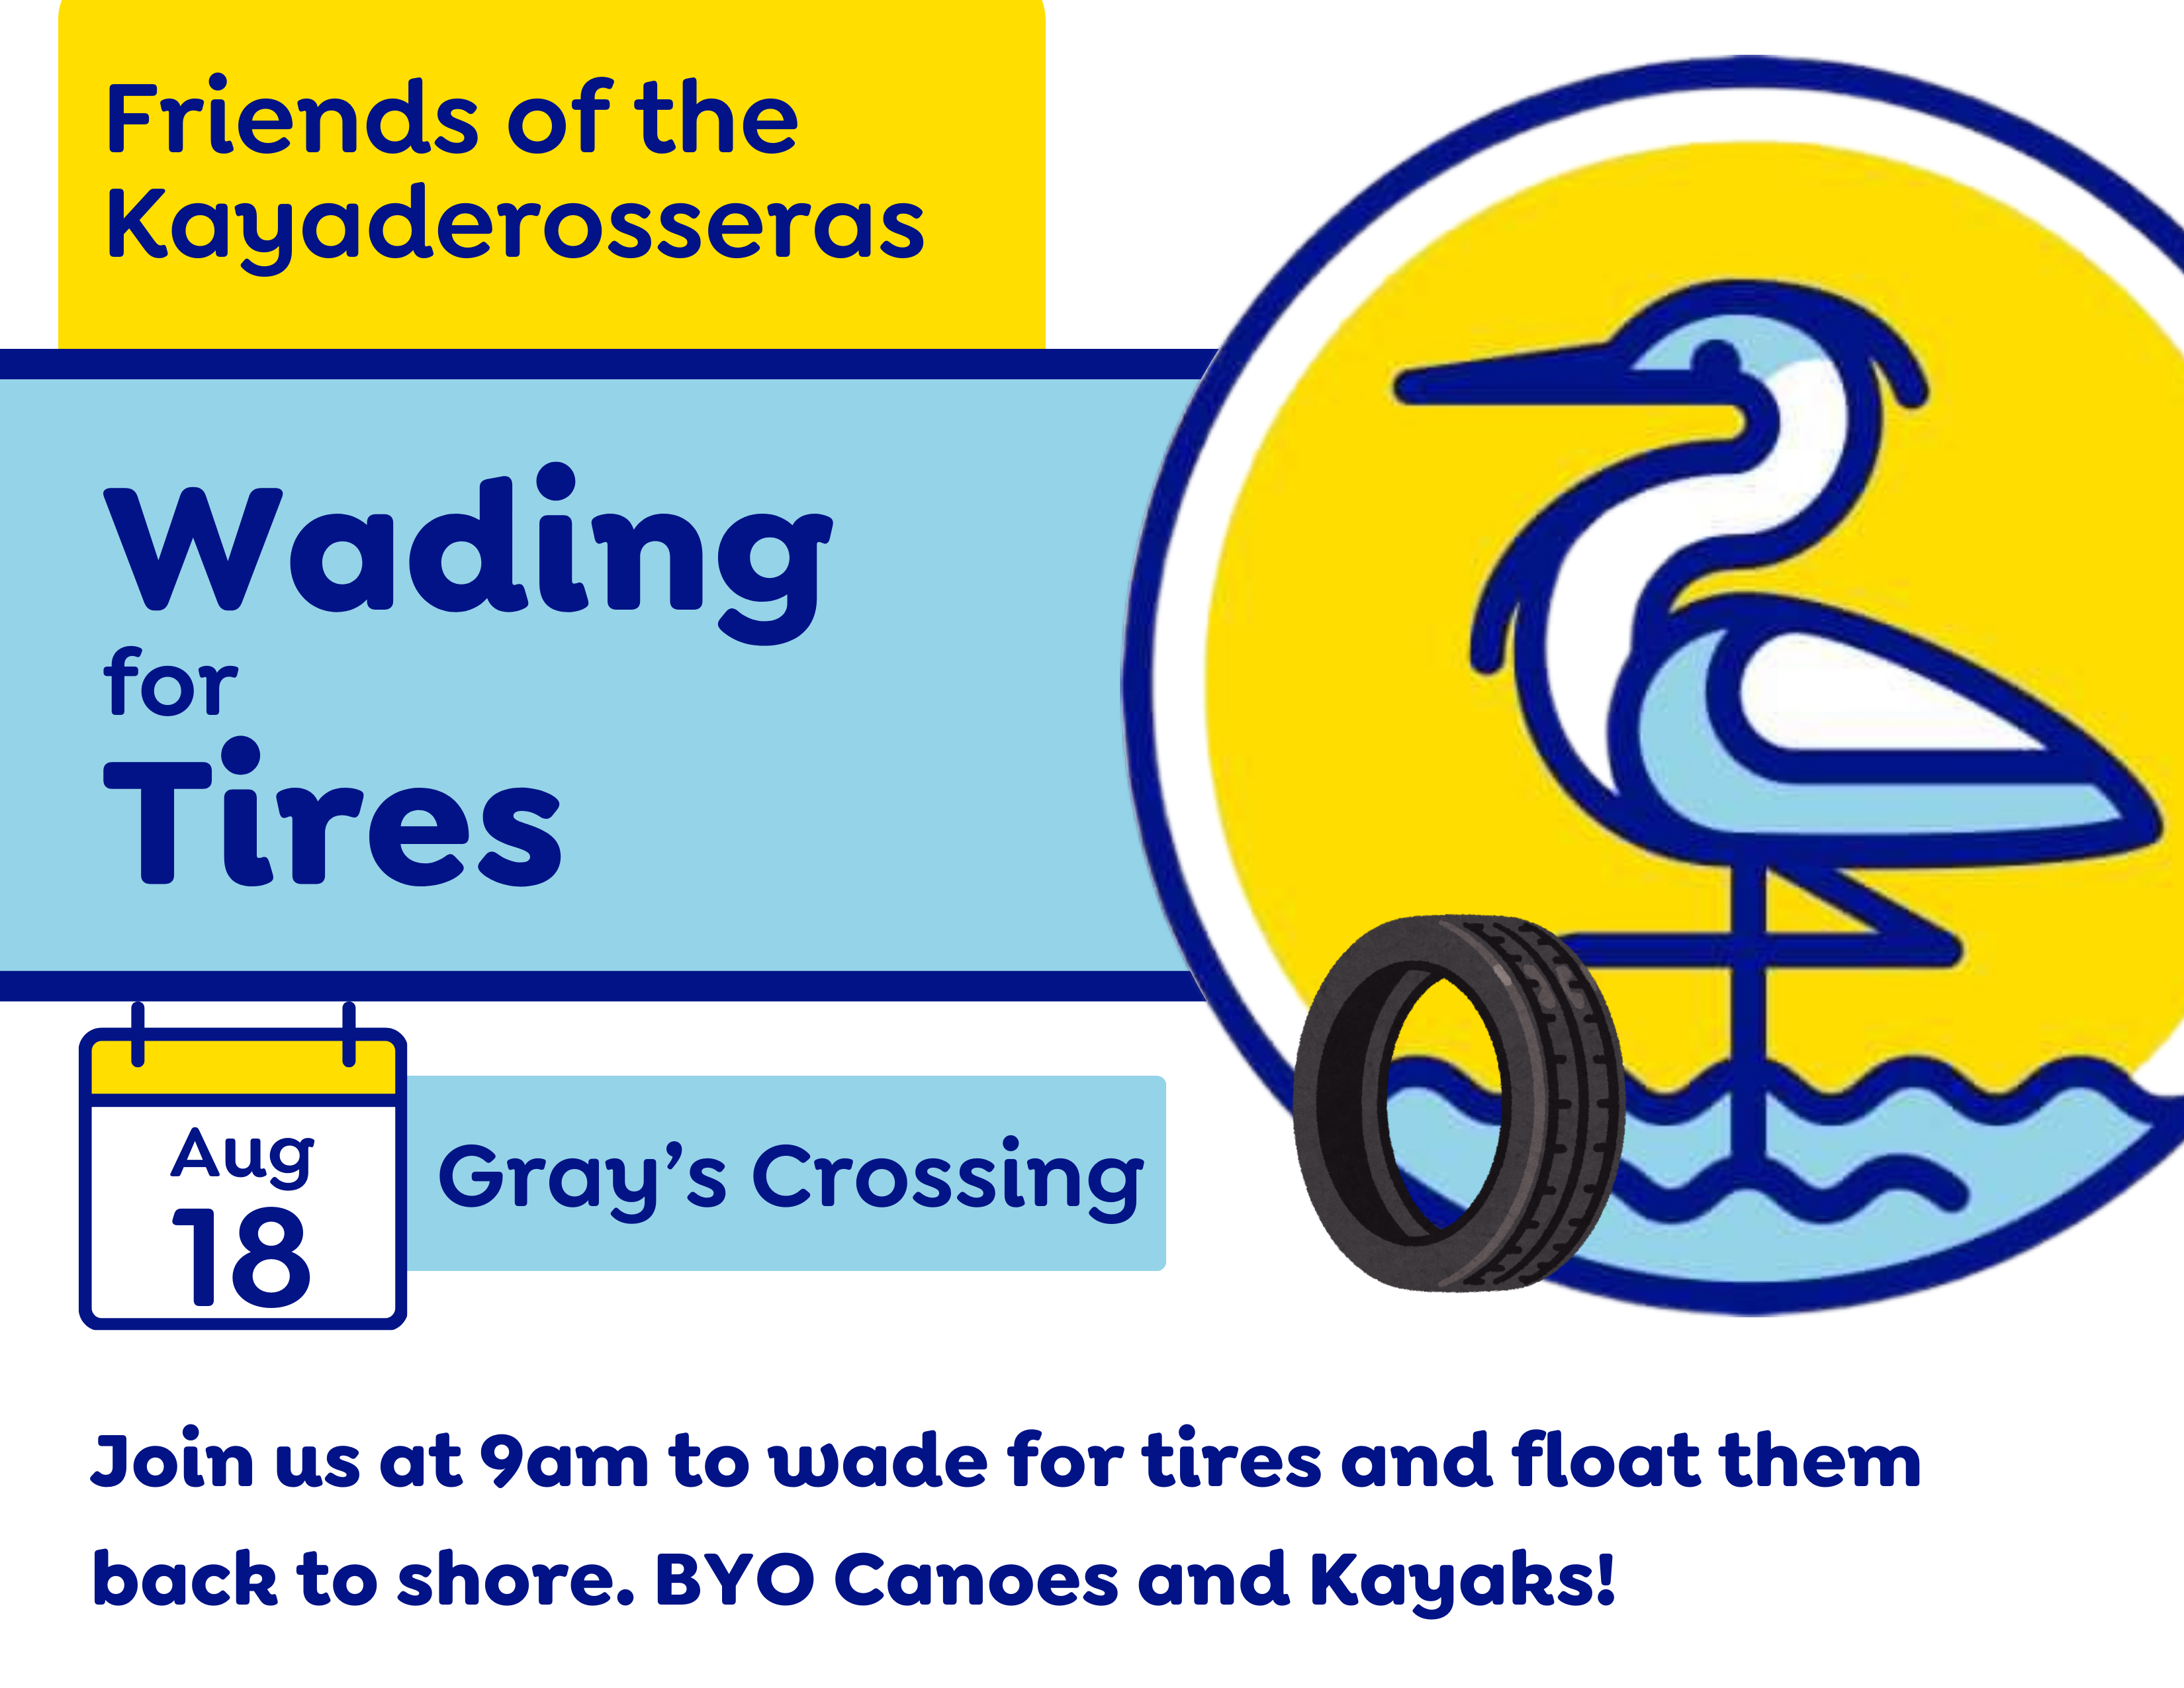 Friends of the Kayaderosseras Wading for Tires Event: August 18 at Gray's Crossing. join us to wade for tires and float them back to shore.